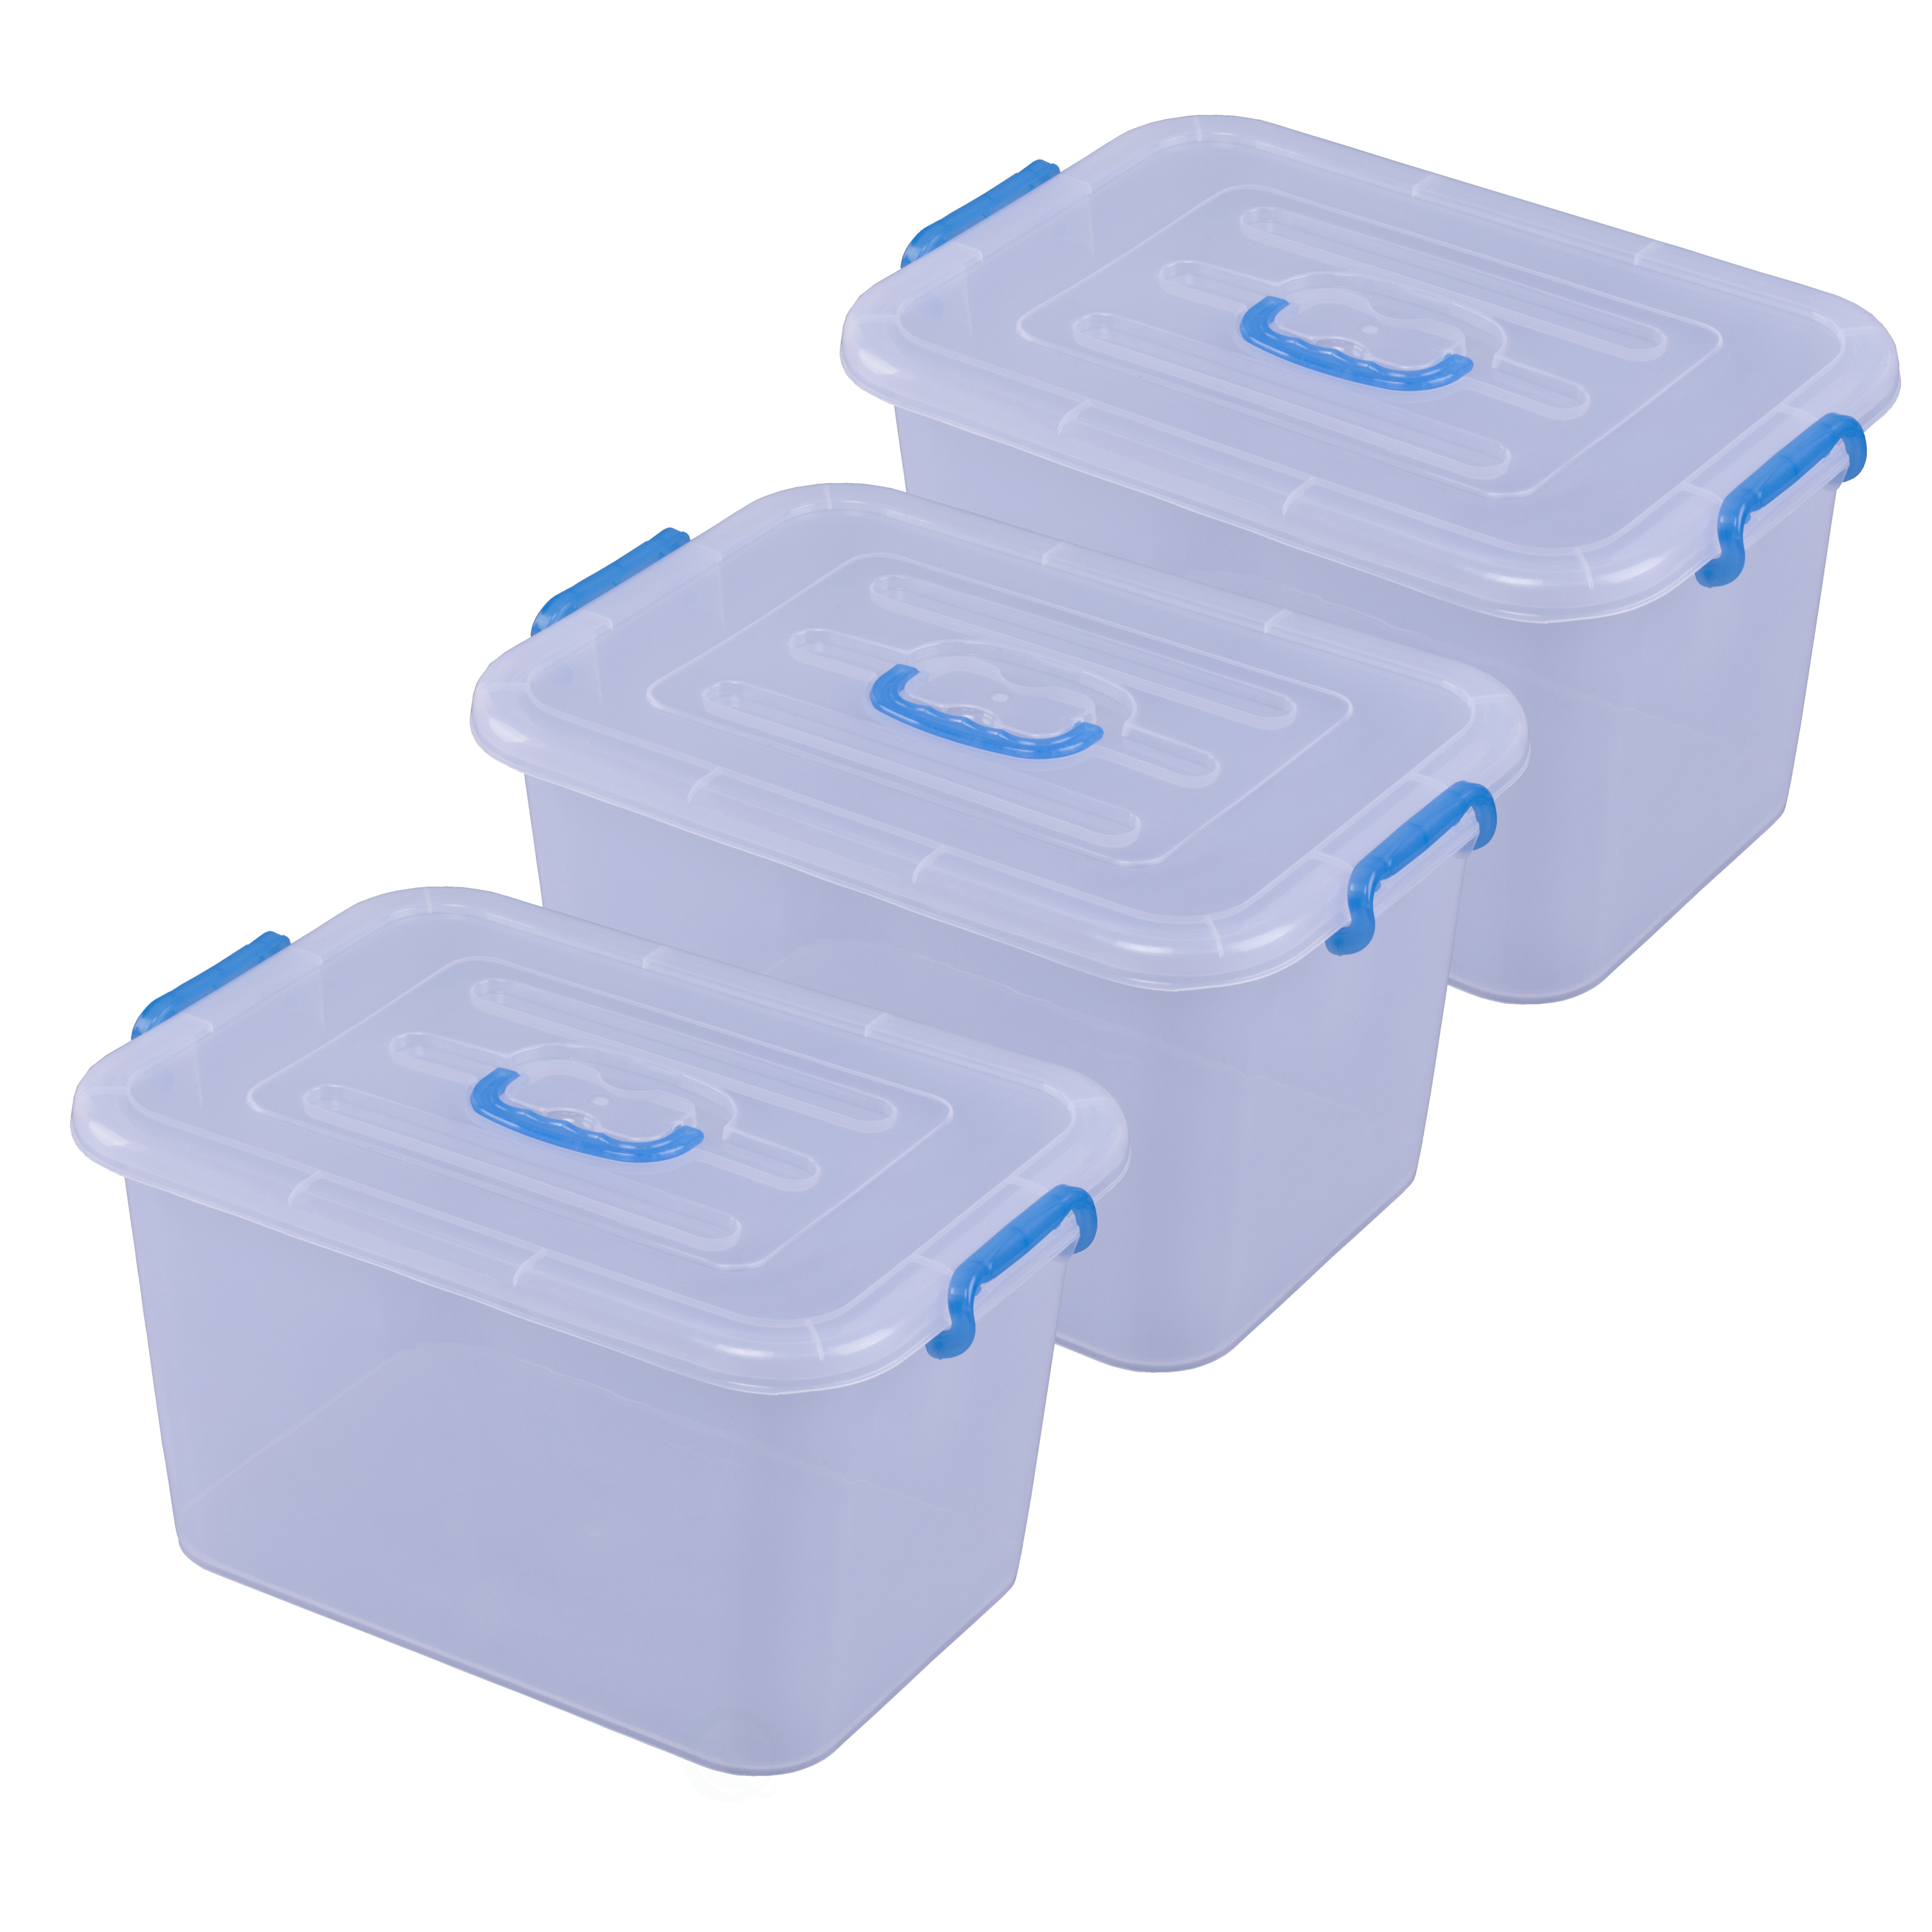 Large Clear Storage Container With Lid and Handles - Set of 3